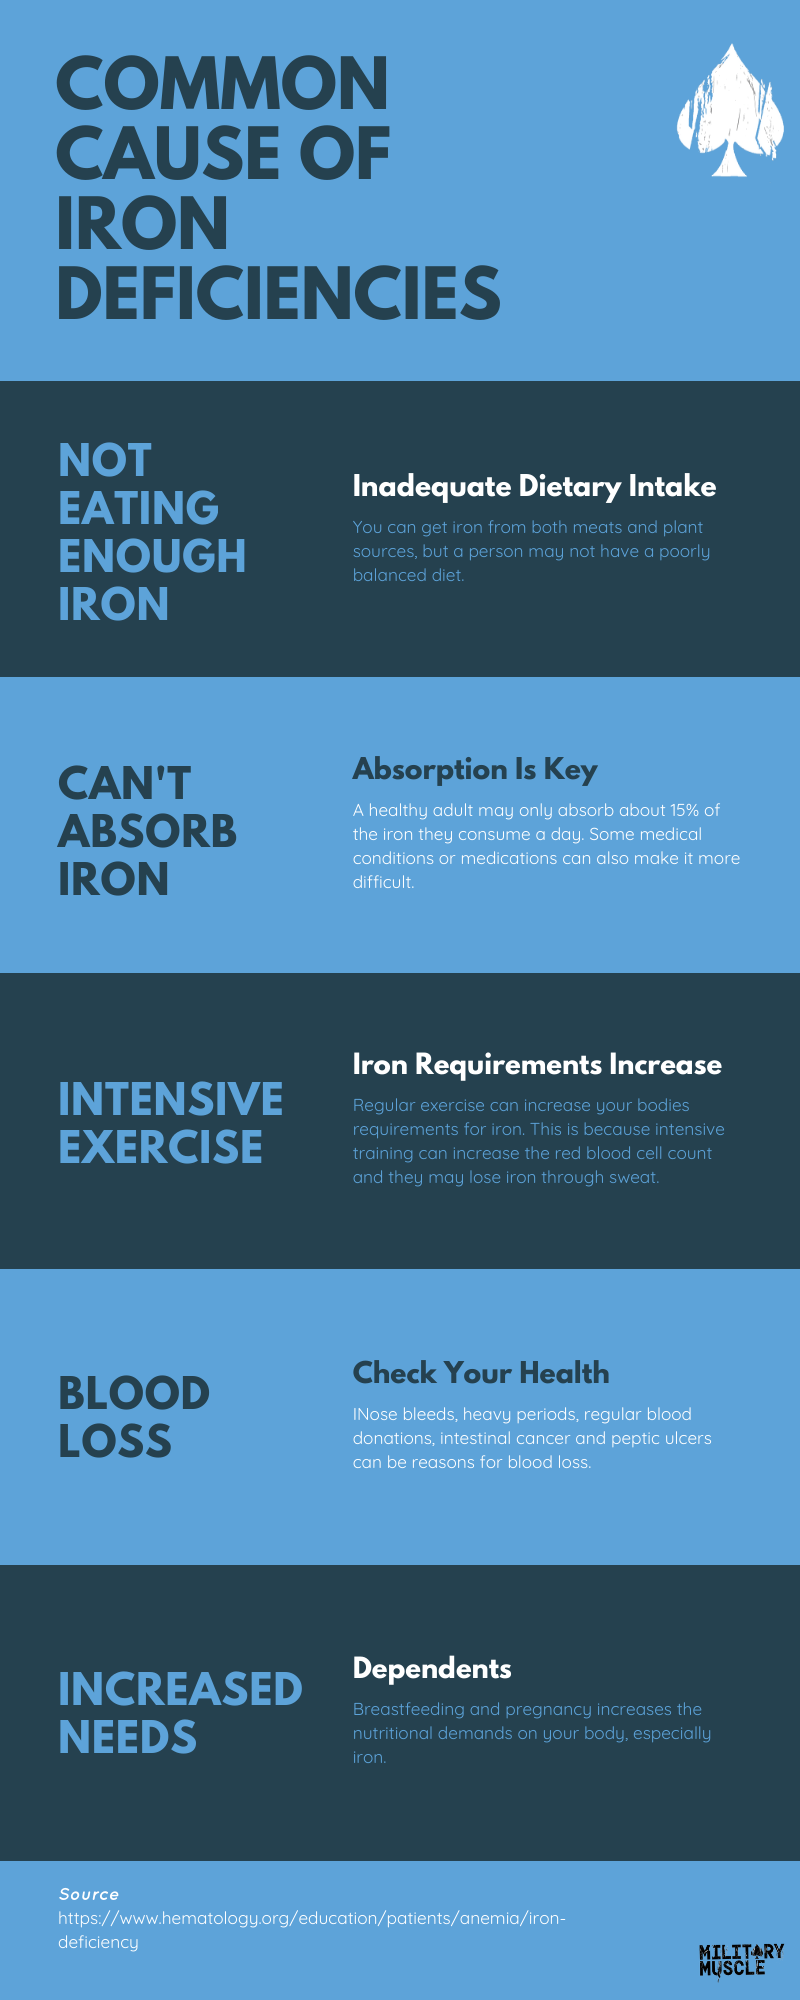 What Happens If You Don't Get Enough Iron?